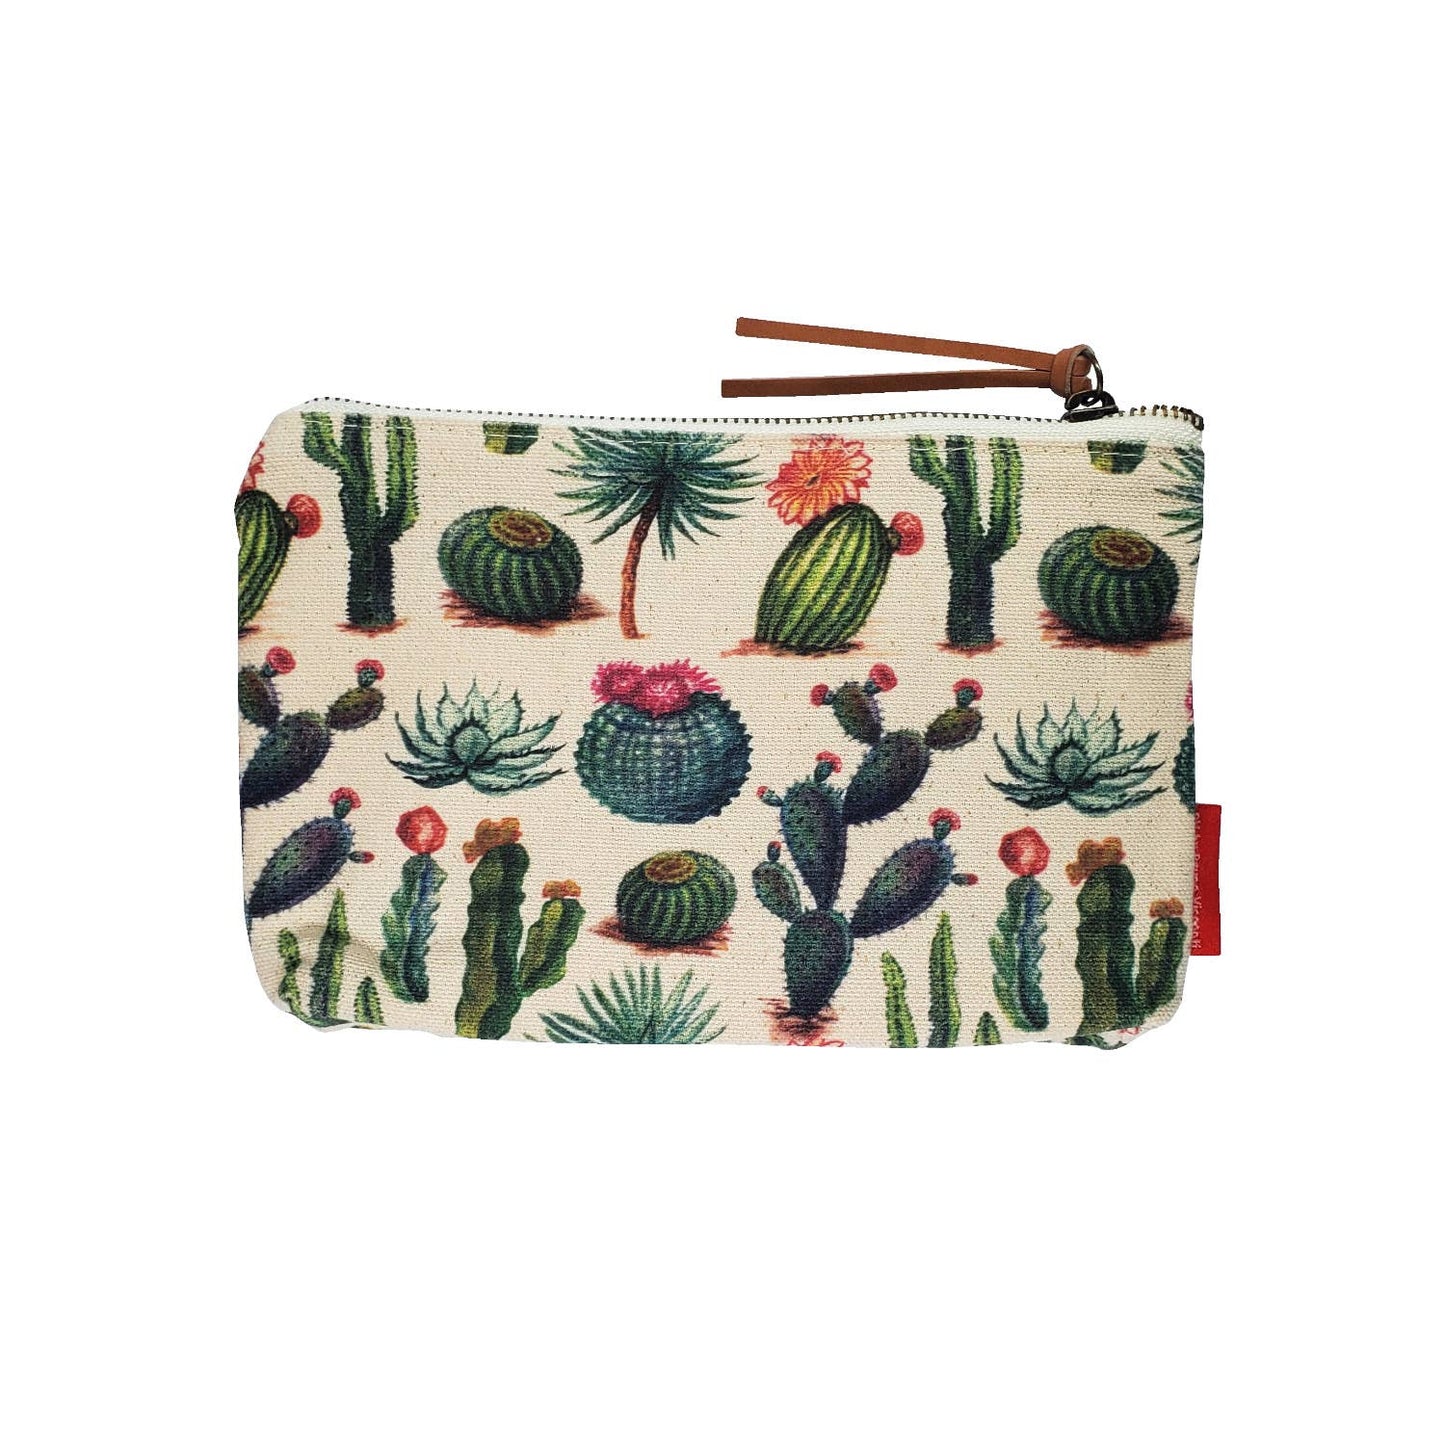 Pouch - Green Cactus